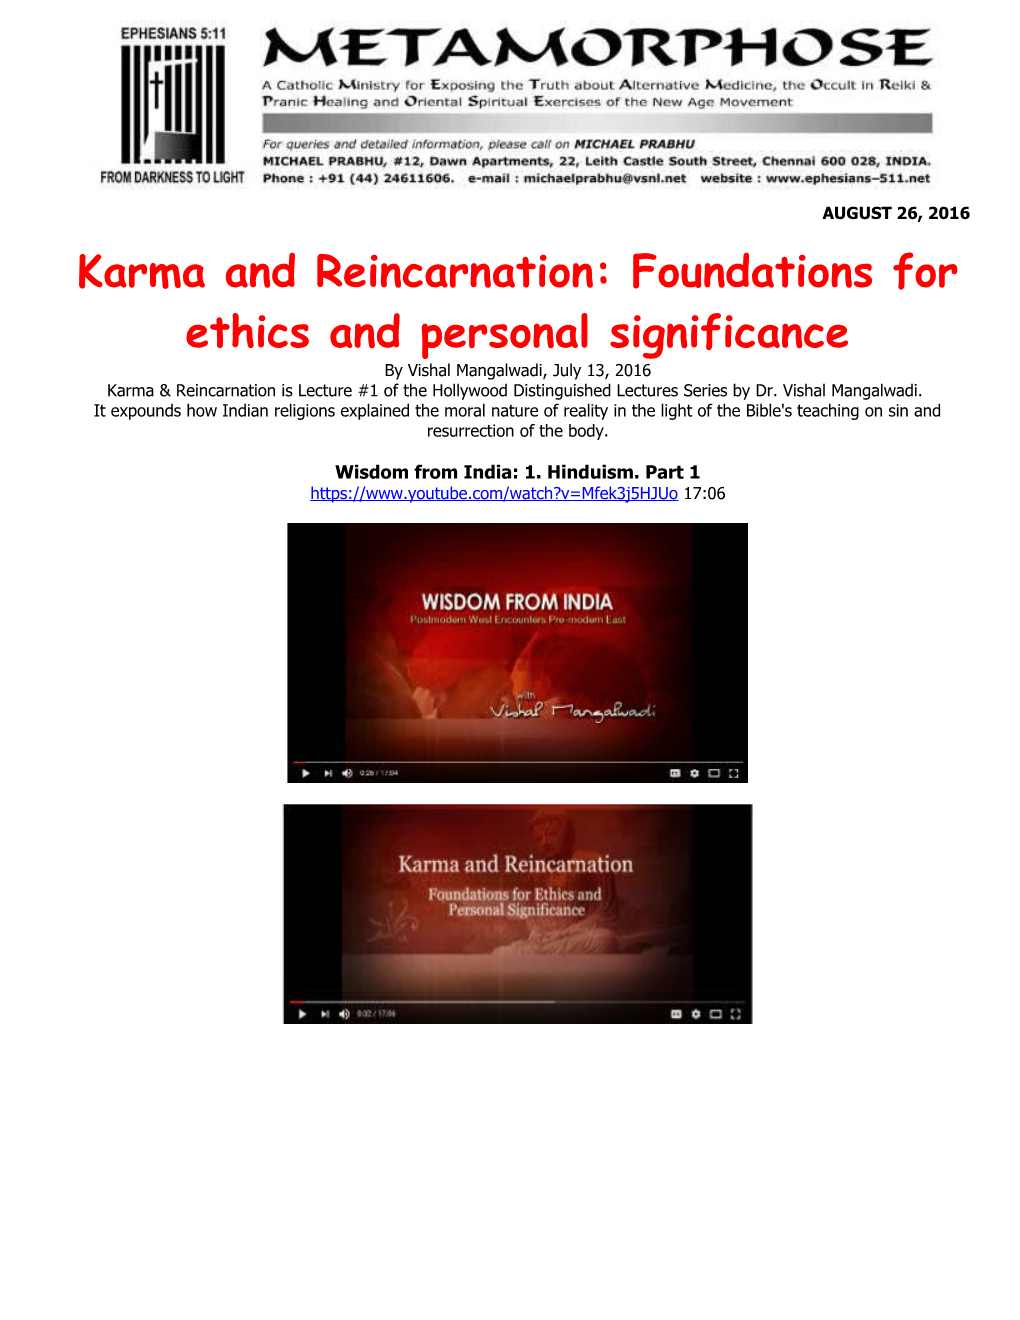 Karma and Reincarnation: Foundations for Ethics and Personal Significance